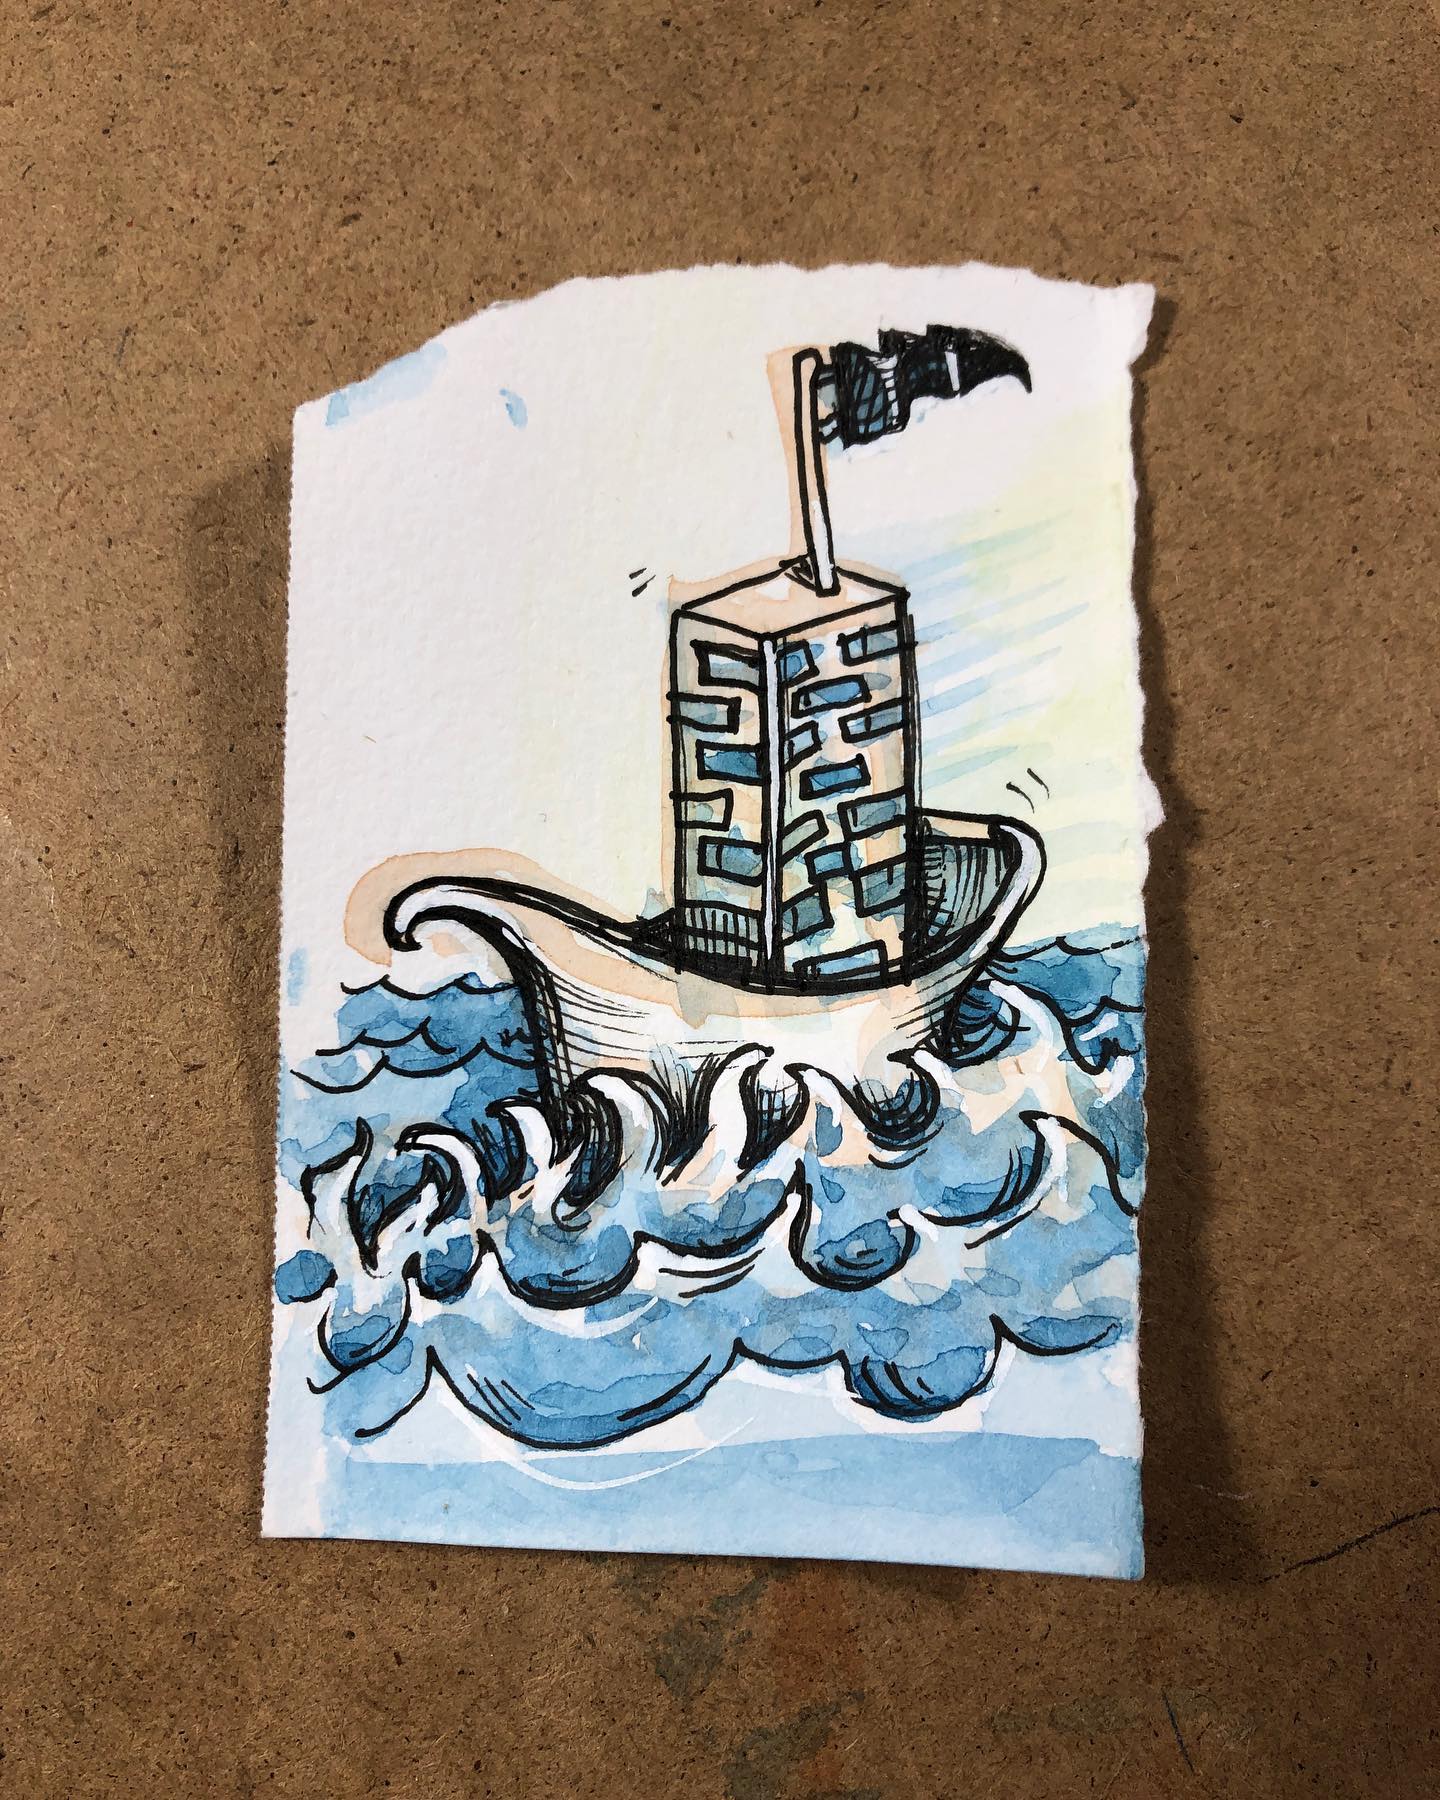 Multi-Level Sea Vessel - ink and watercolor drawing of a top-heavy boat in rough seas